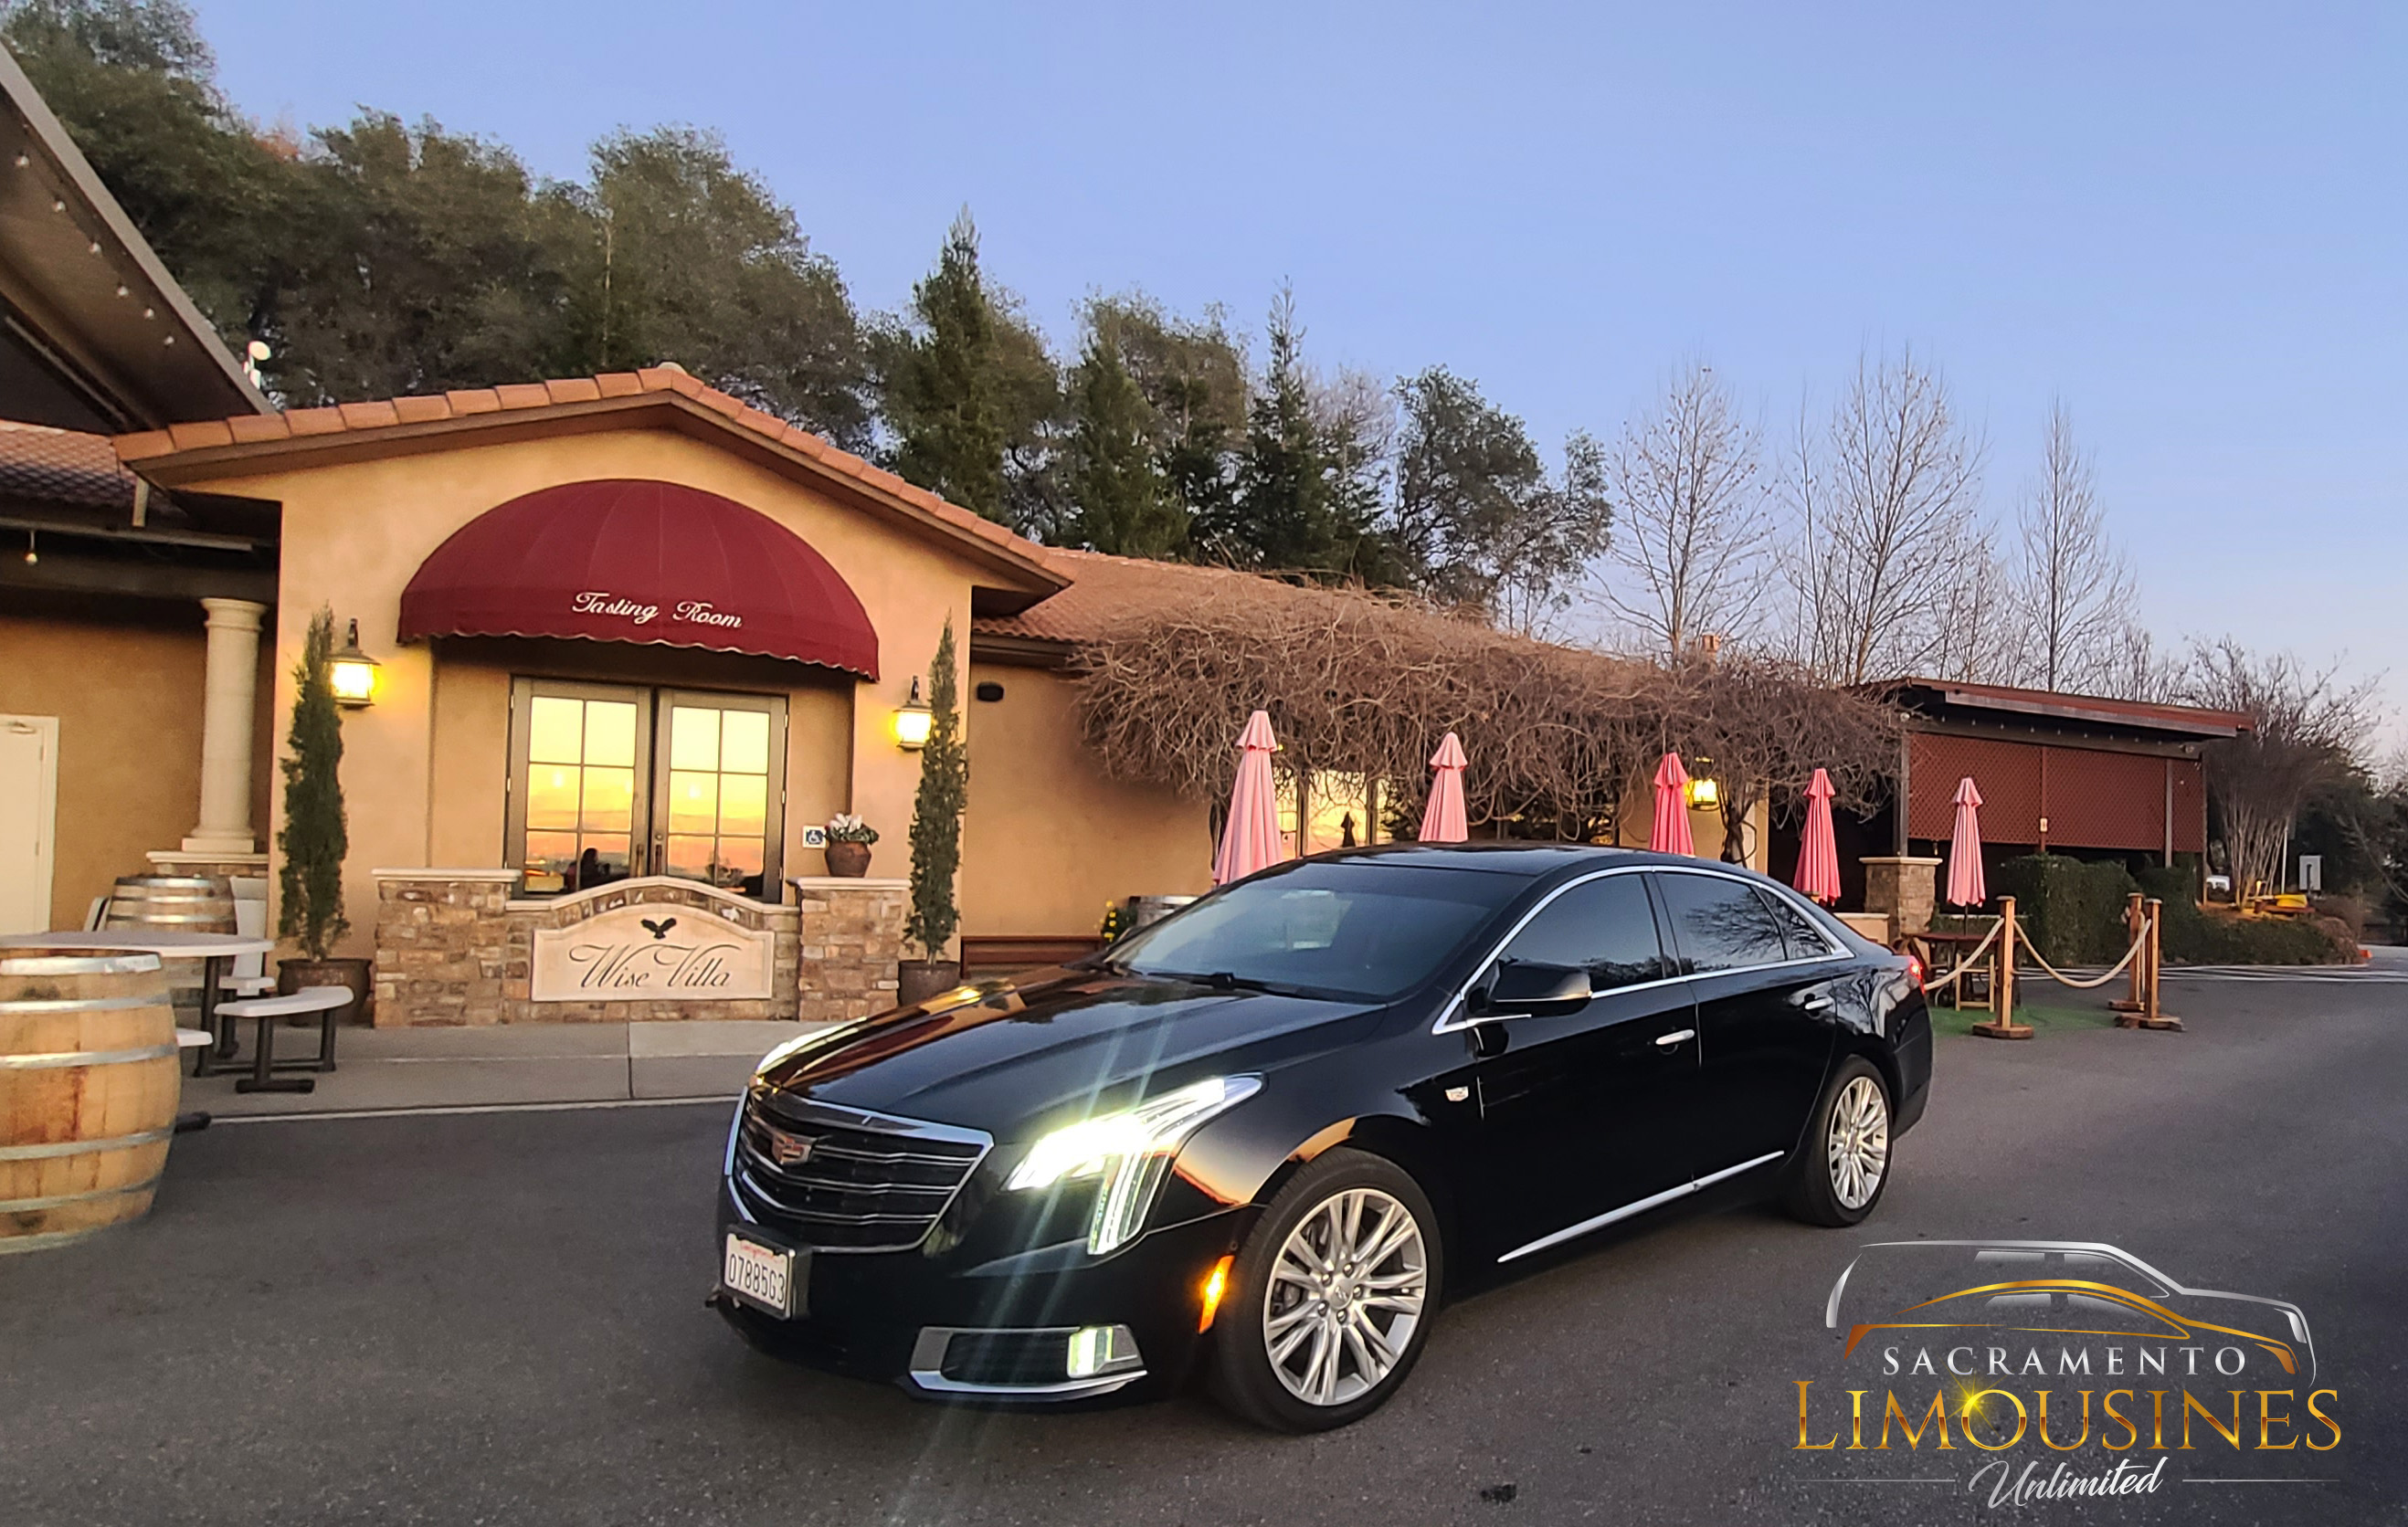 Sedan_Xts_WIneCountry_Placer_WiseVilla_Winery_OutFront